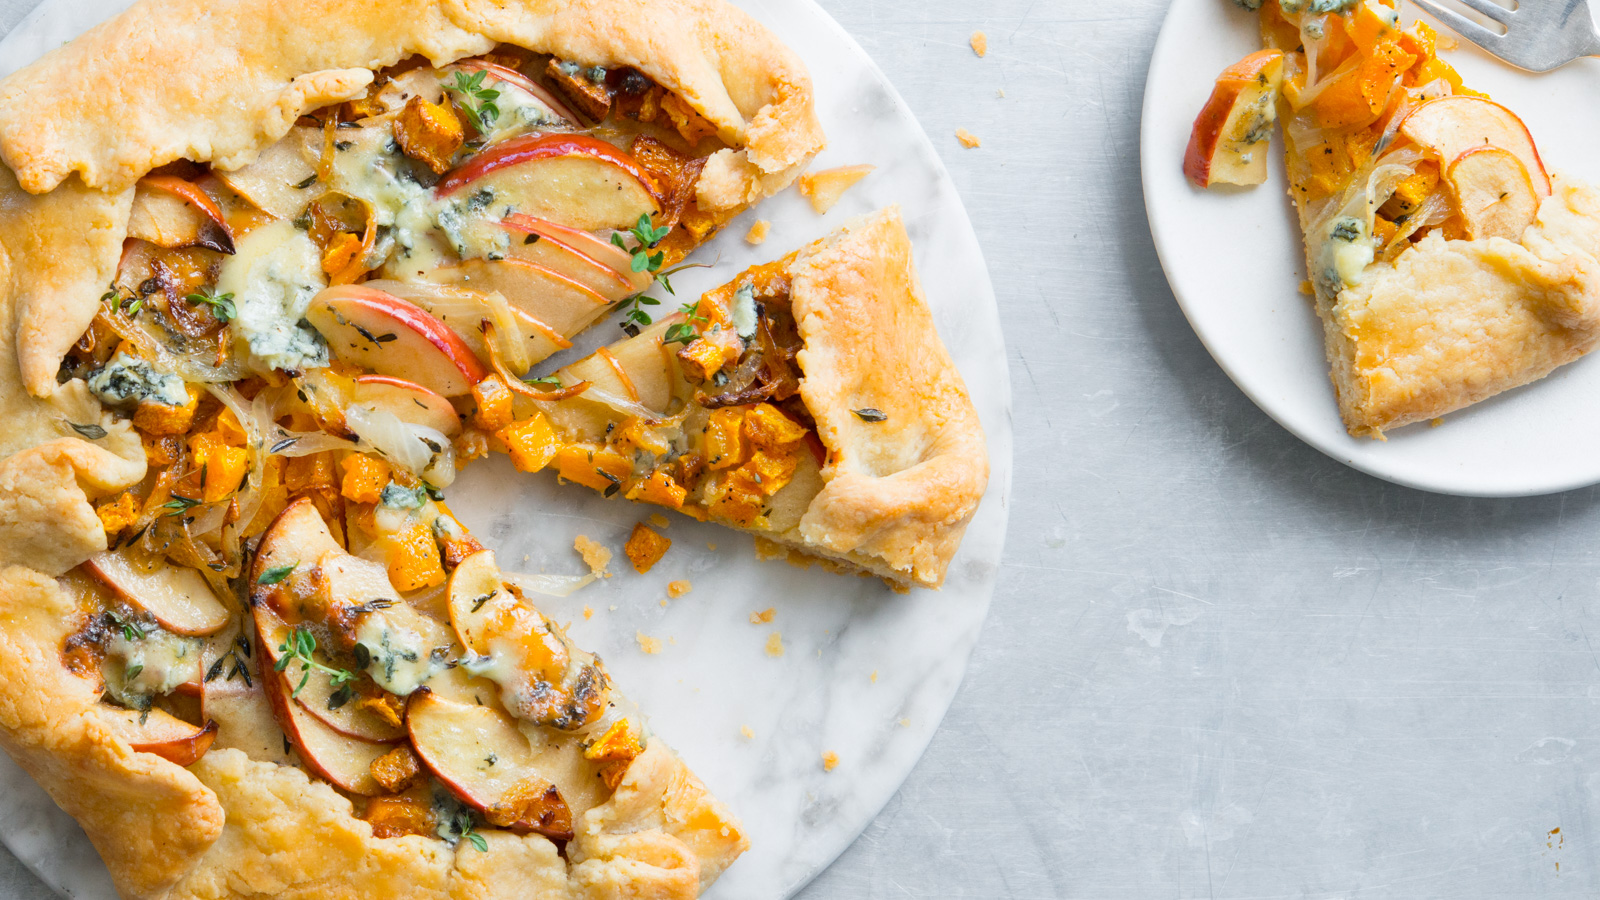 WINTER SQUASH, APPLE AND BLUE CHEESE GALETTE